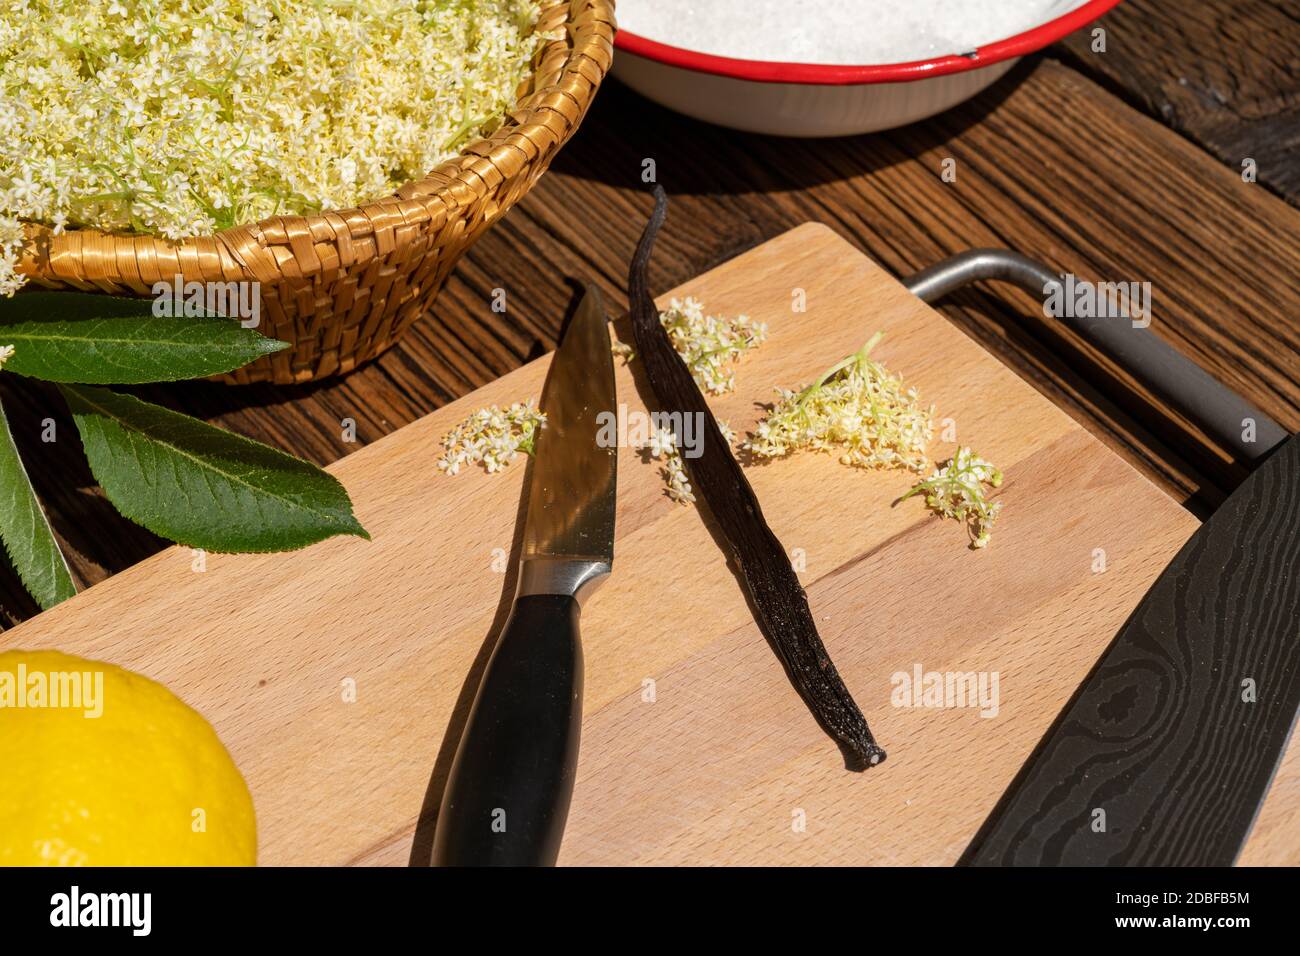 On a cutting board lies a kitchen knife and a vanilla pod as ingredients for the elderflower liqueur Stock Photo